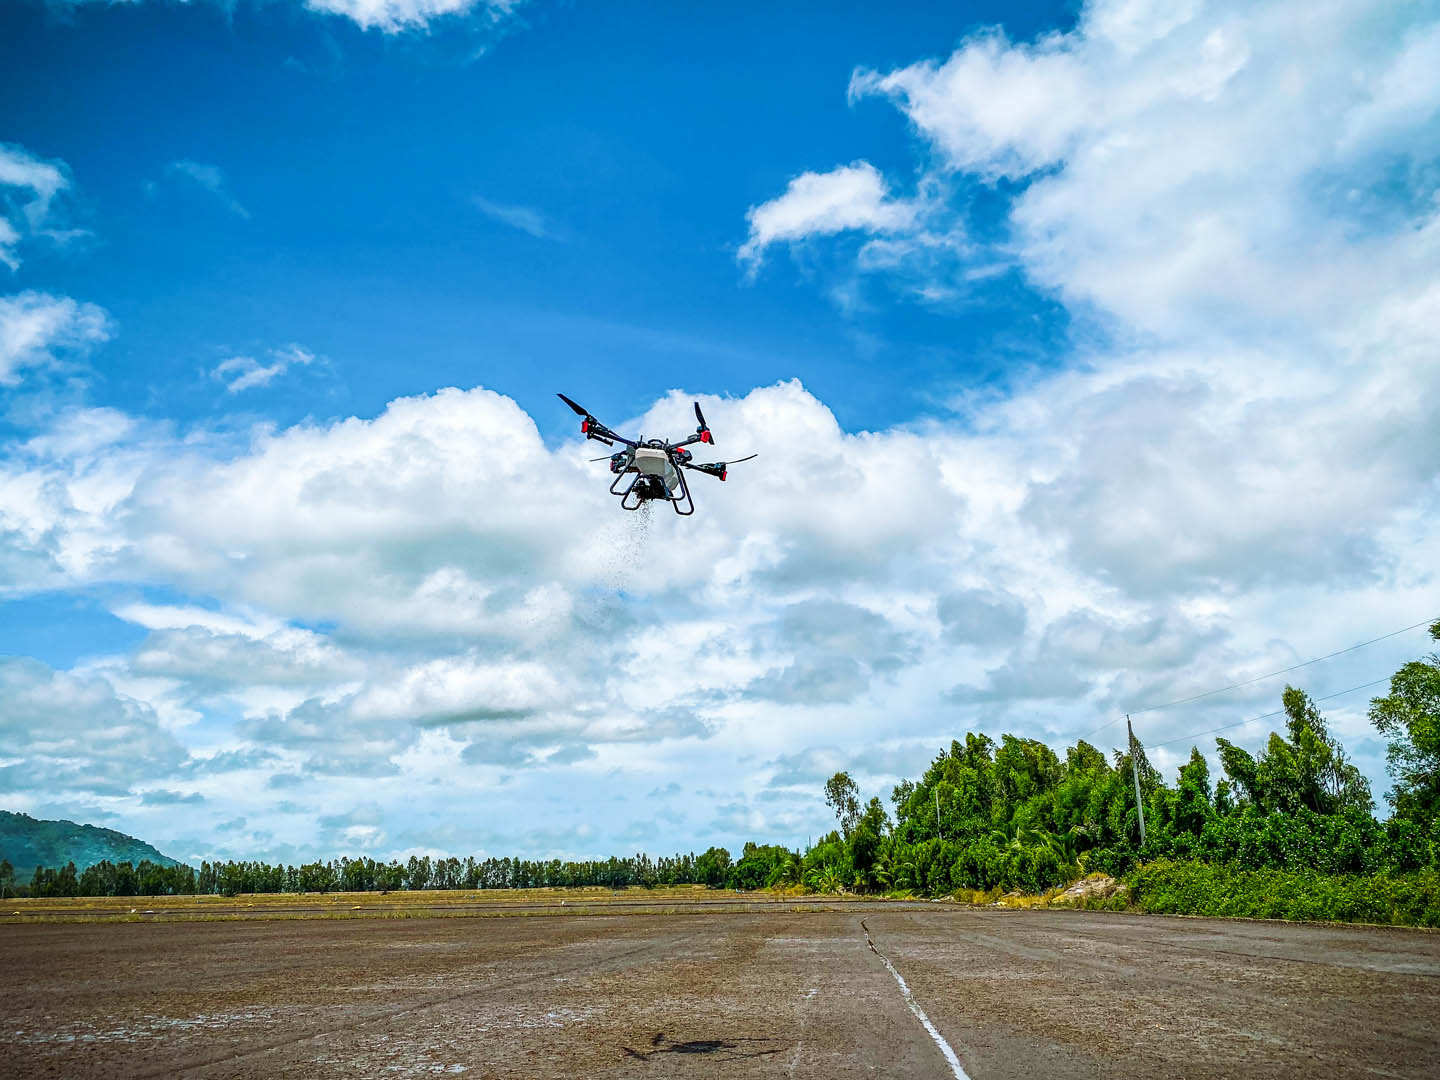  XAG P100 Agricultural Drone was sowing seeds in Nhan's rice farm